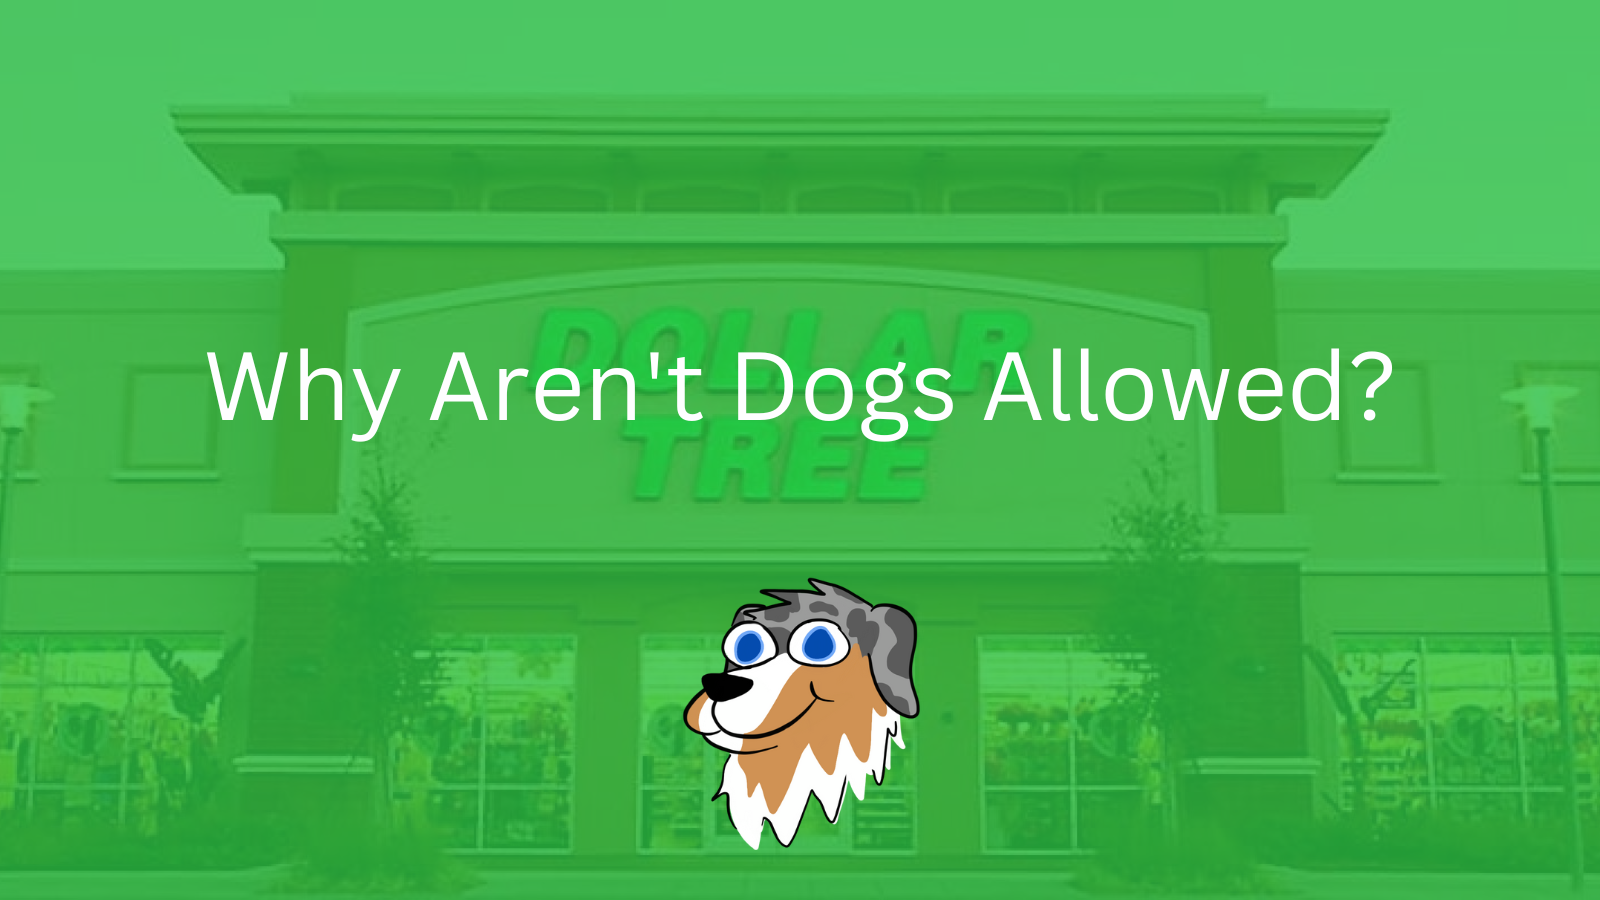 Image Text: "Why Aren't Dogs Allowed?"